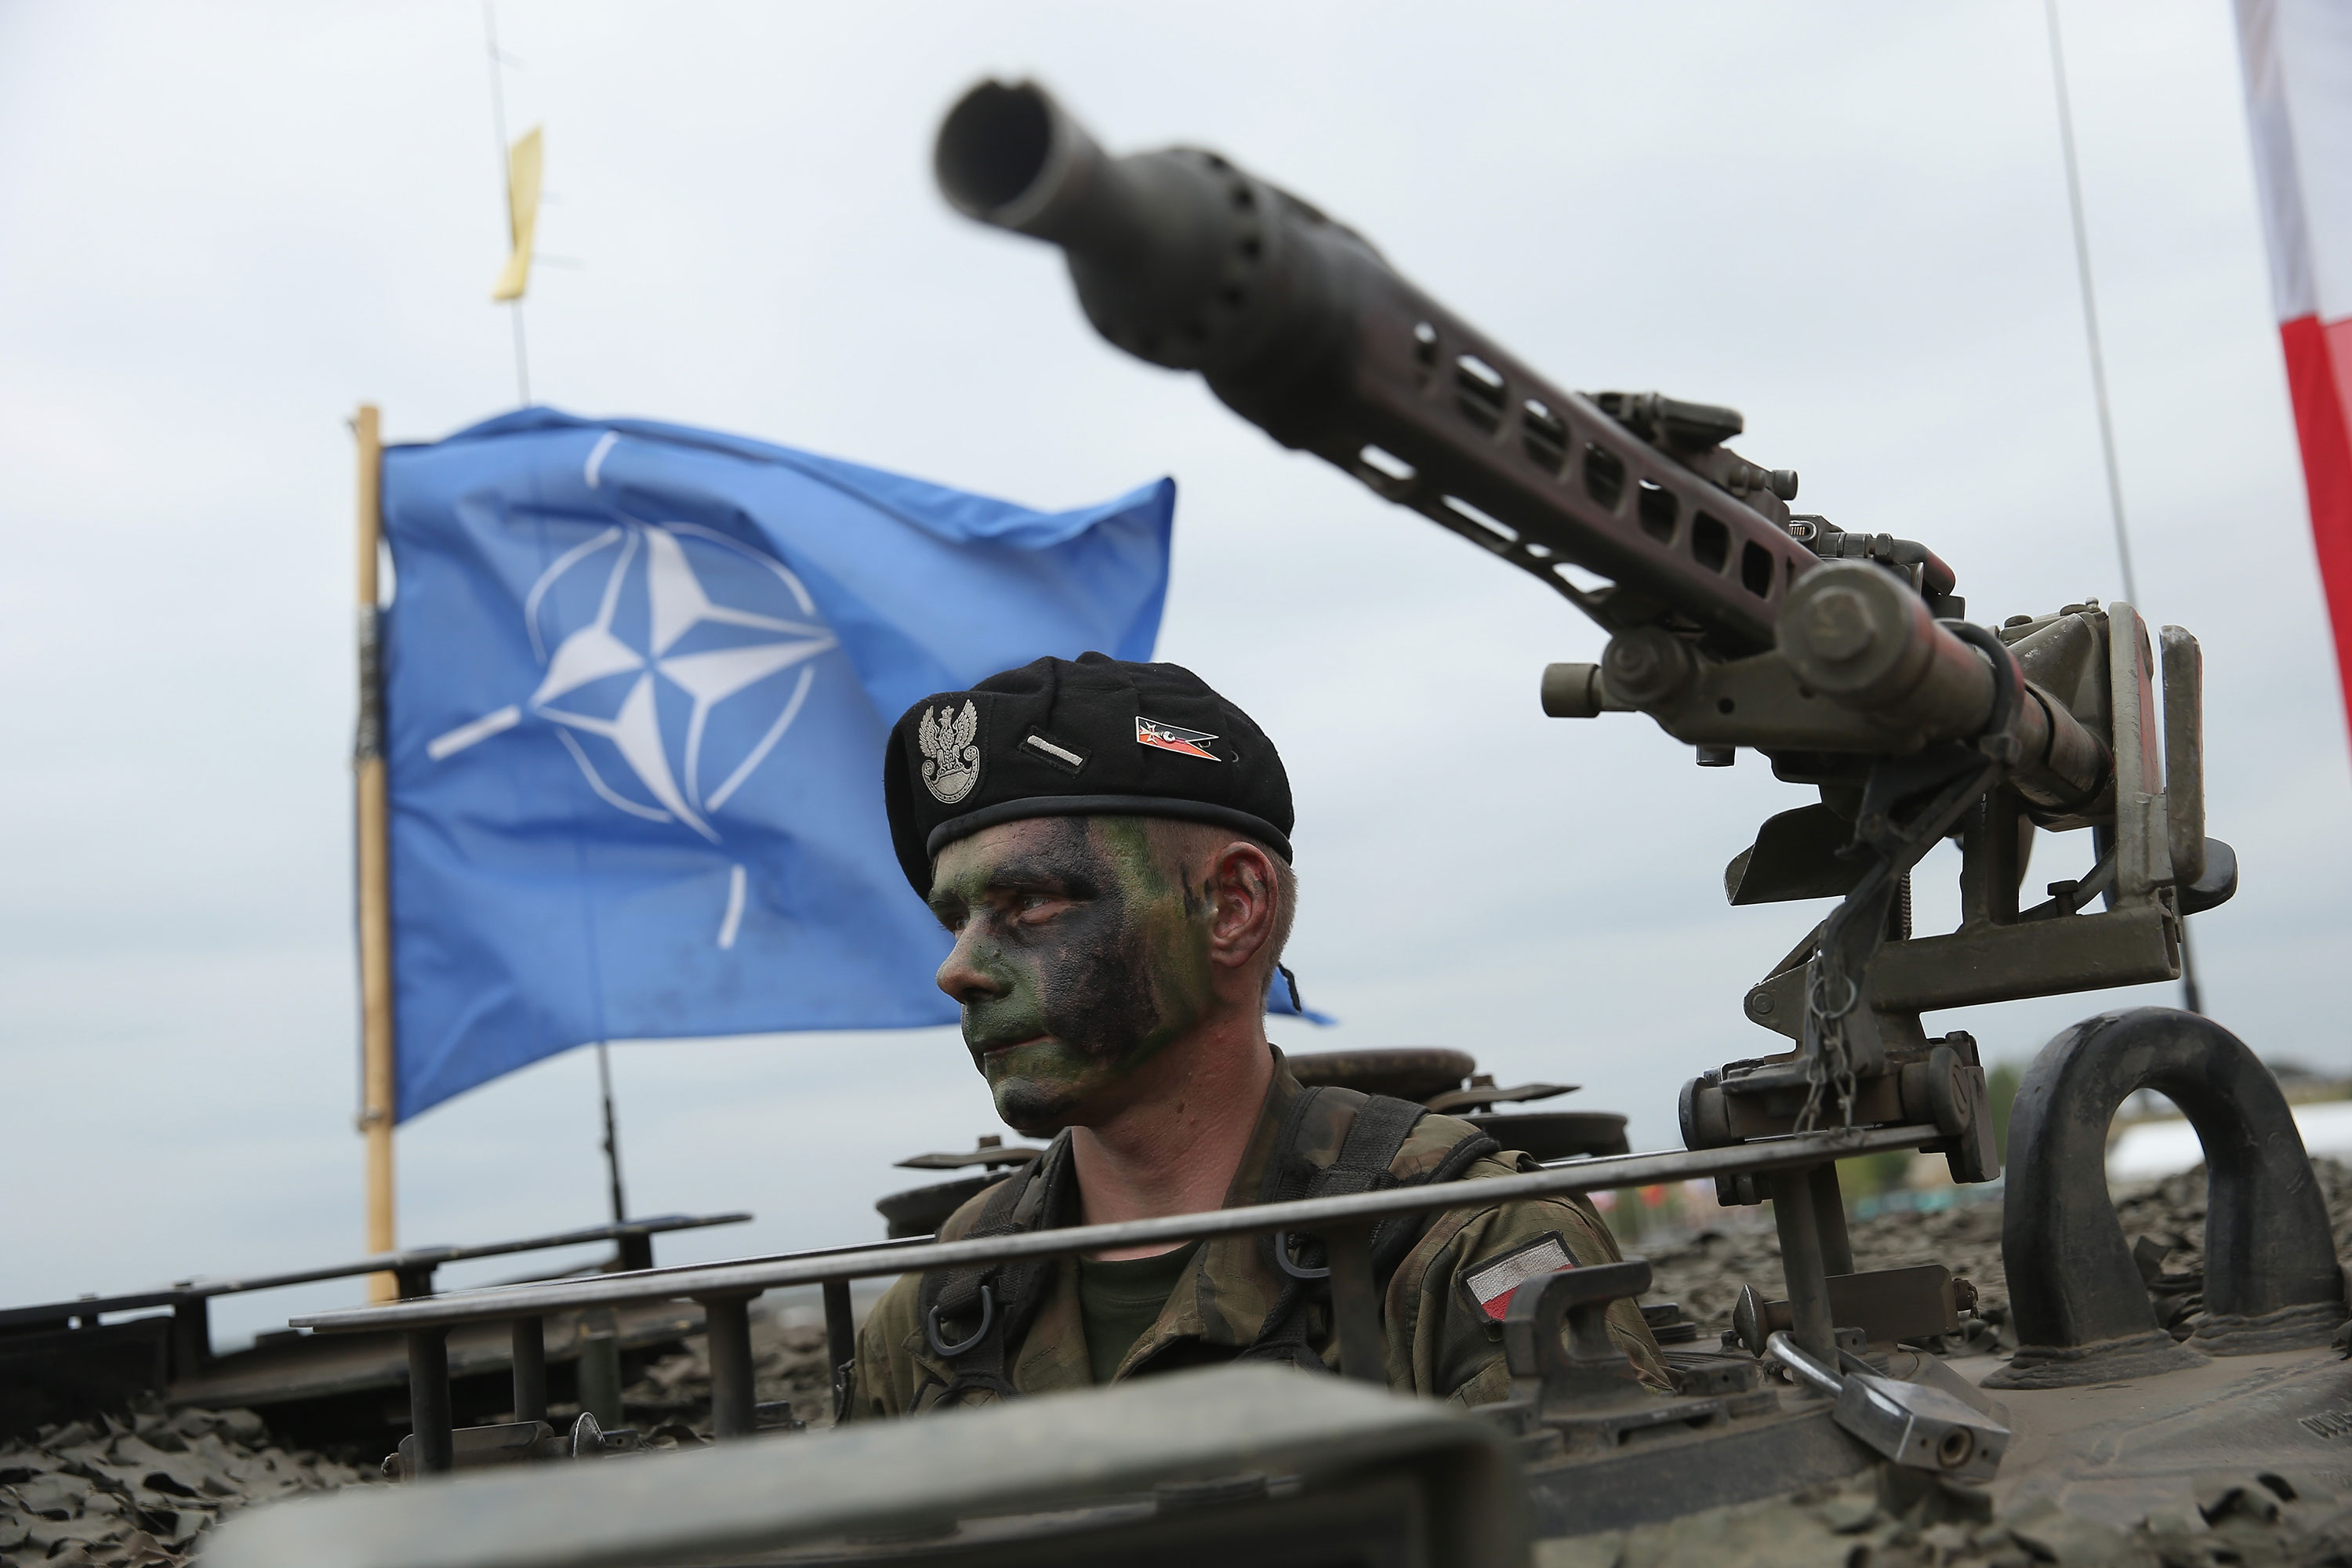 A soldier with the Polish Army sits in a tank as a NATO flag flies behind him during military exercises in 2015 in Zagan, Poland.